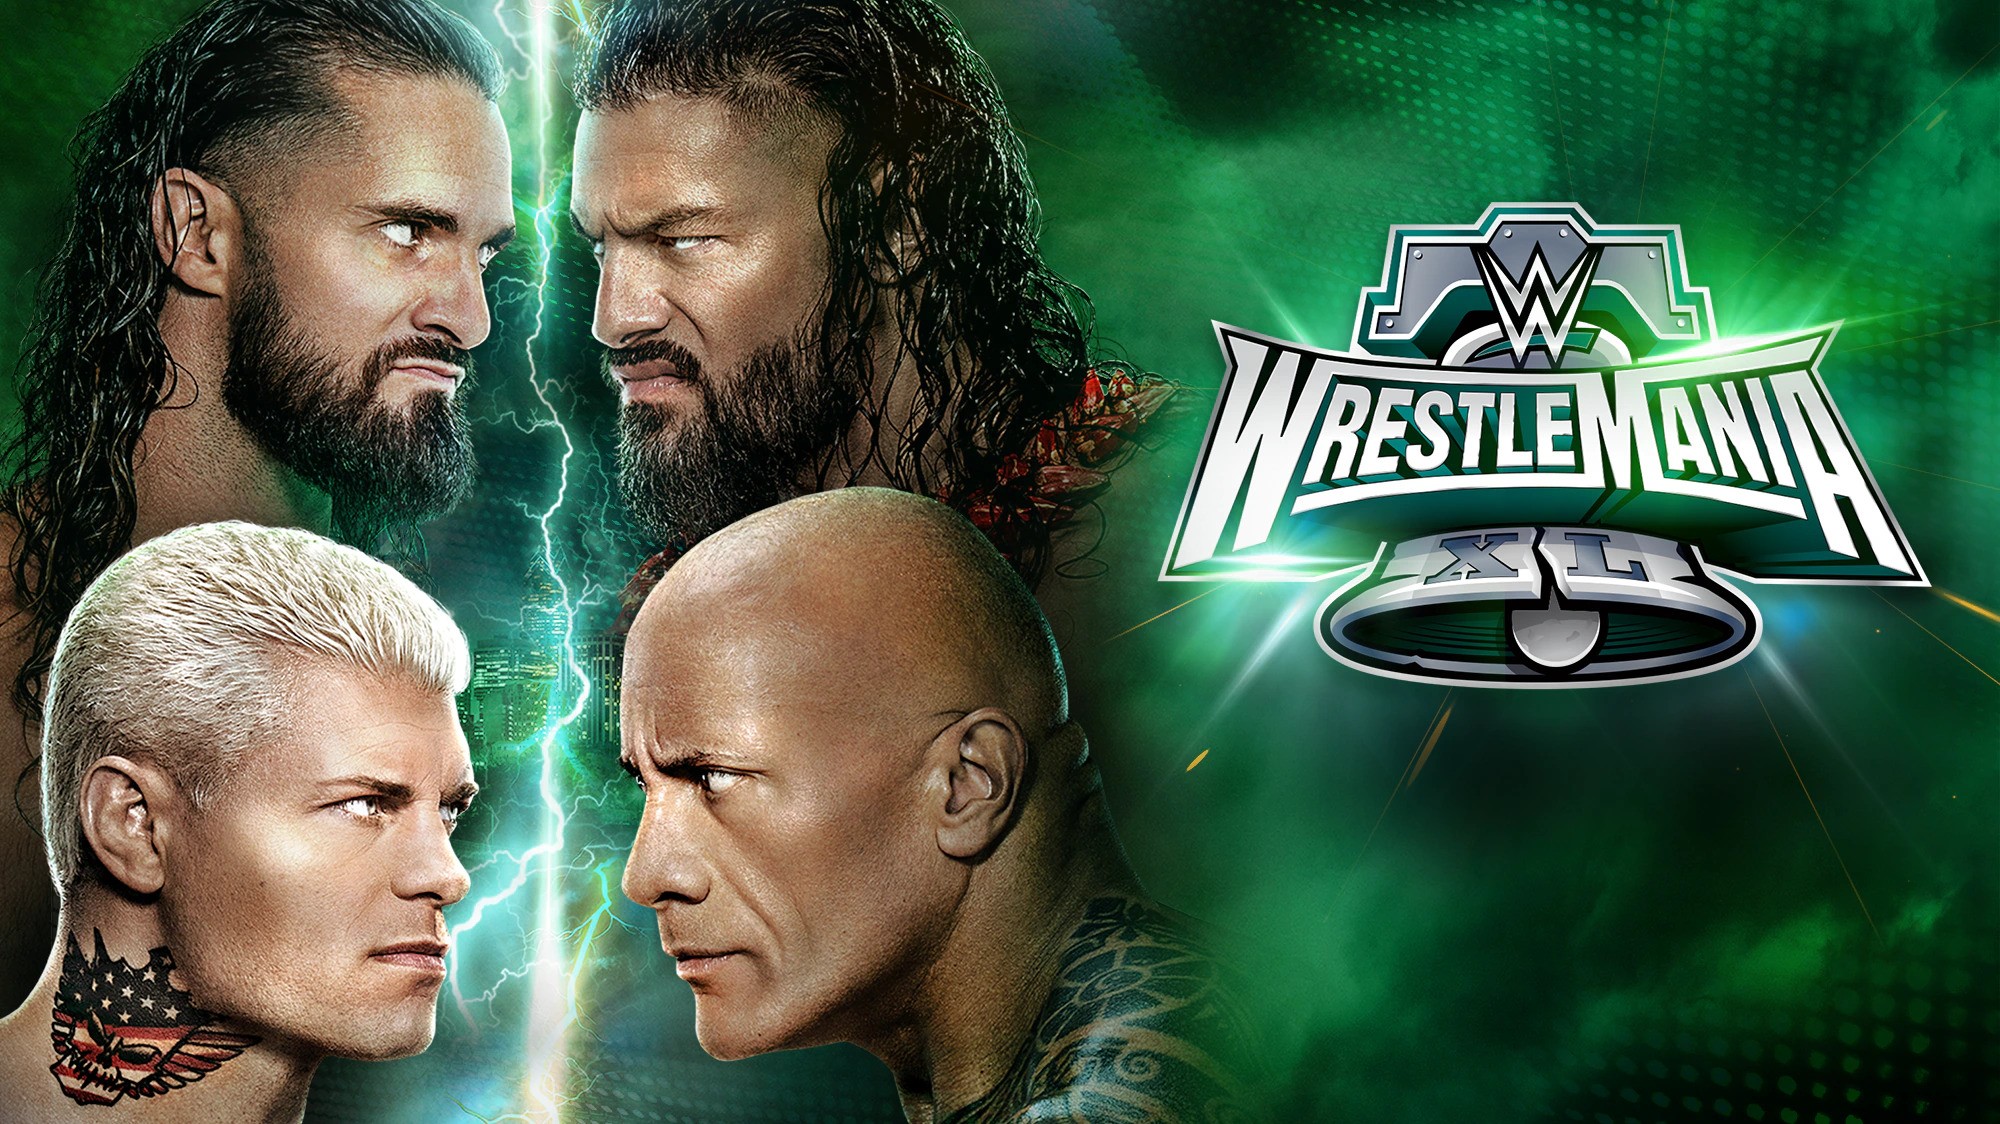 A match graphic featuring Roman Reigns, The Rock, Cody Rhodes, and Seth Rollins for WWE WrestleMania - Night One.